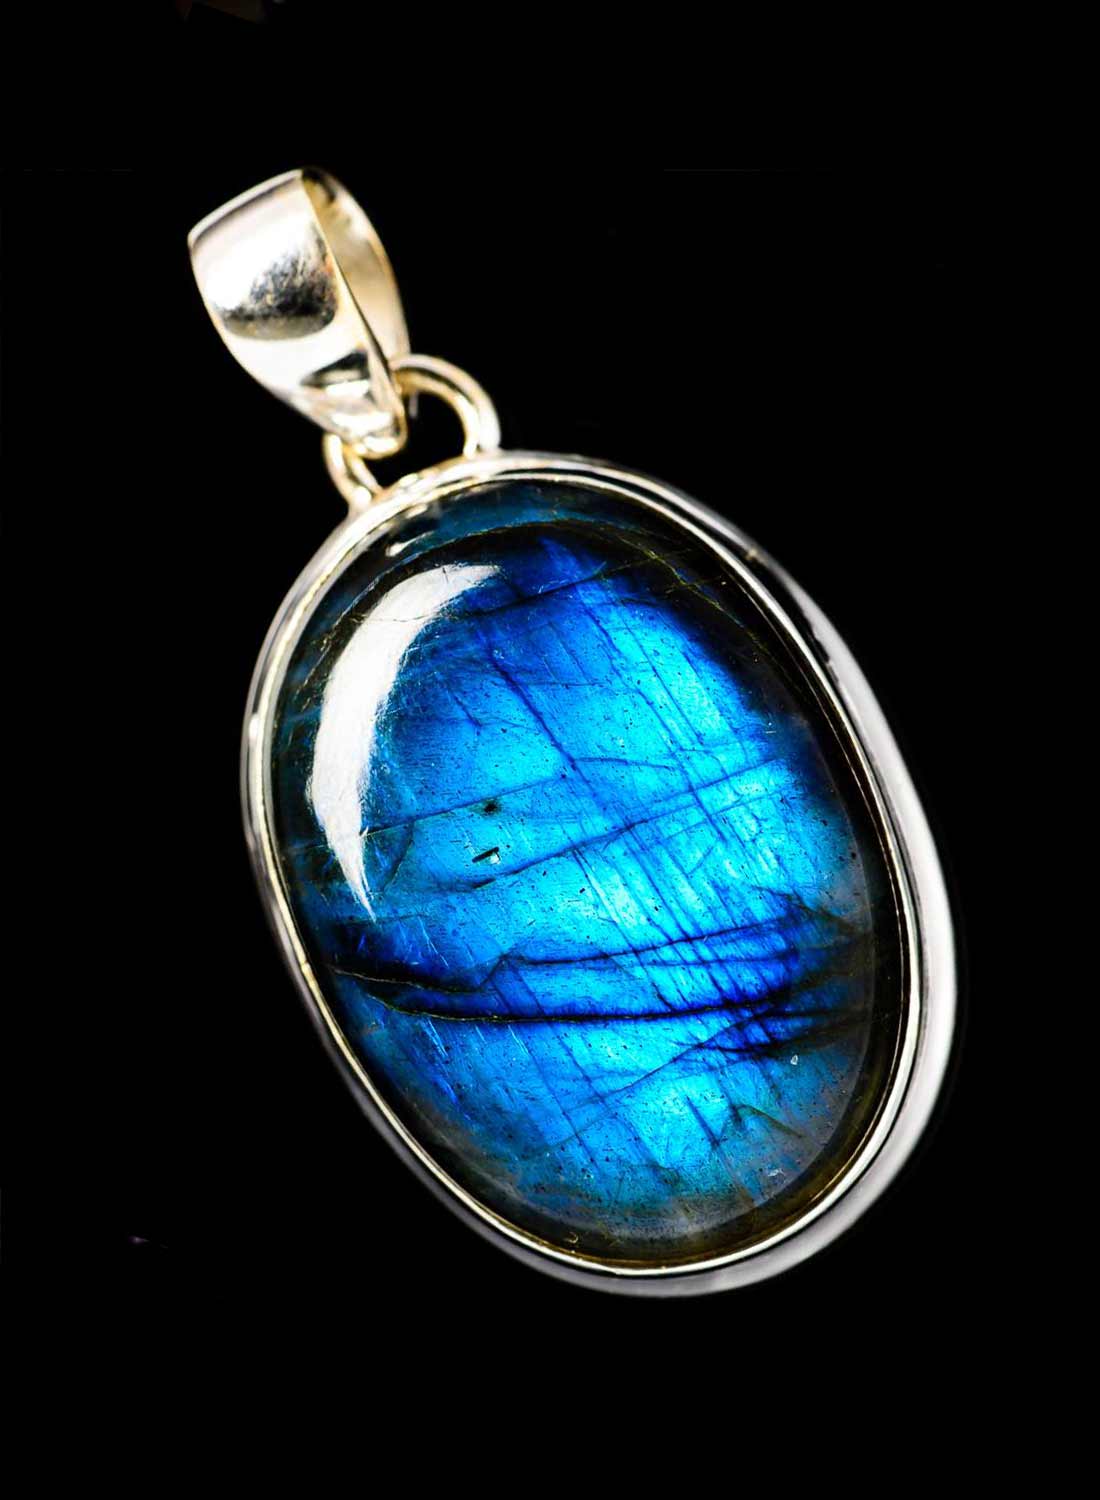 Labradorite carries both the energy of the Sun and Moon